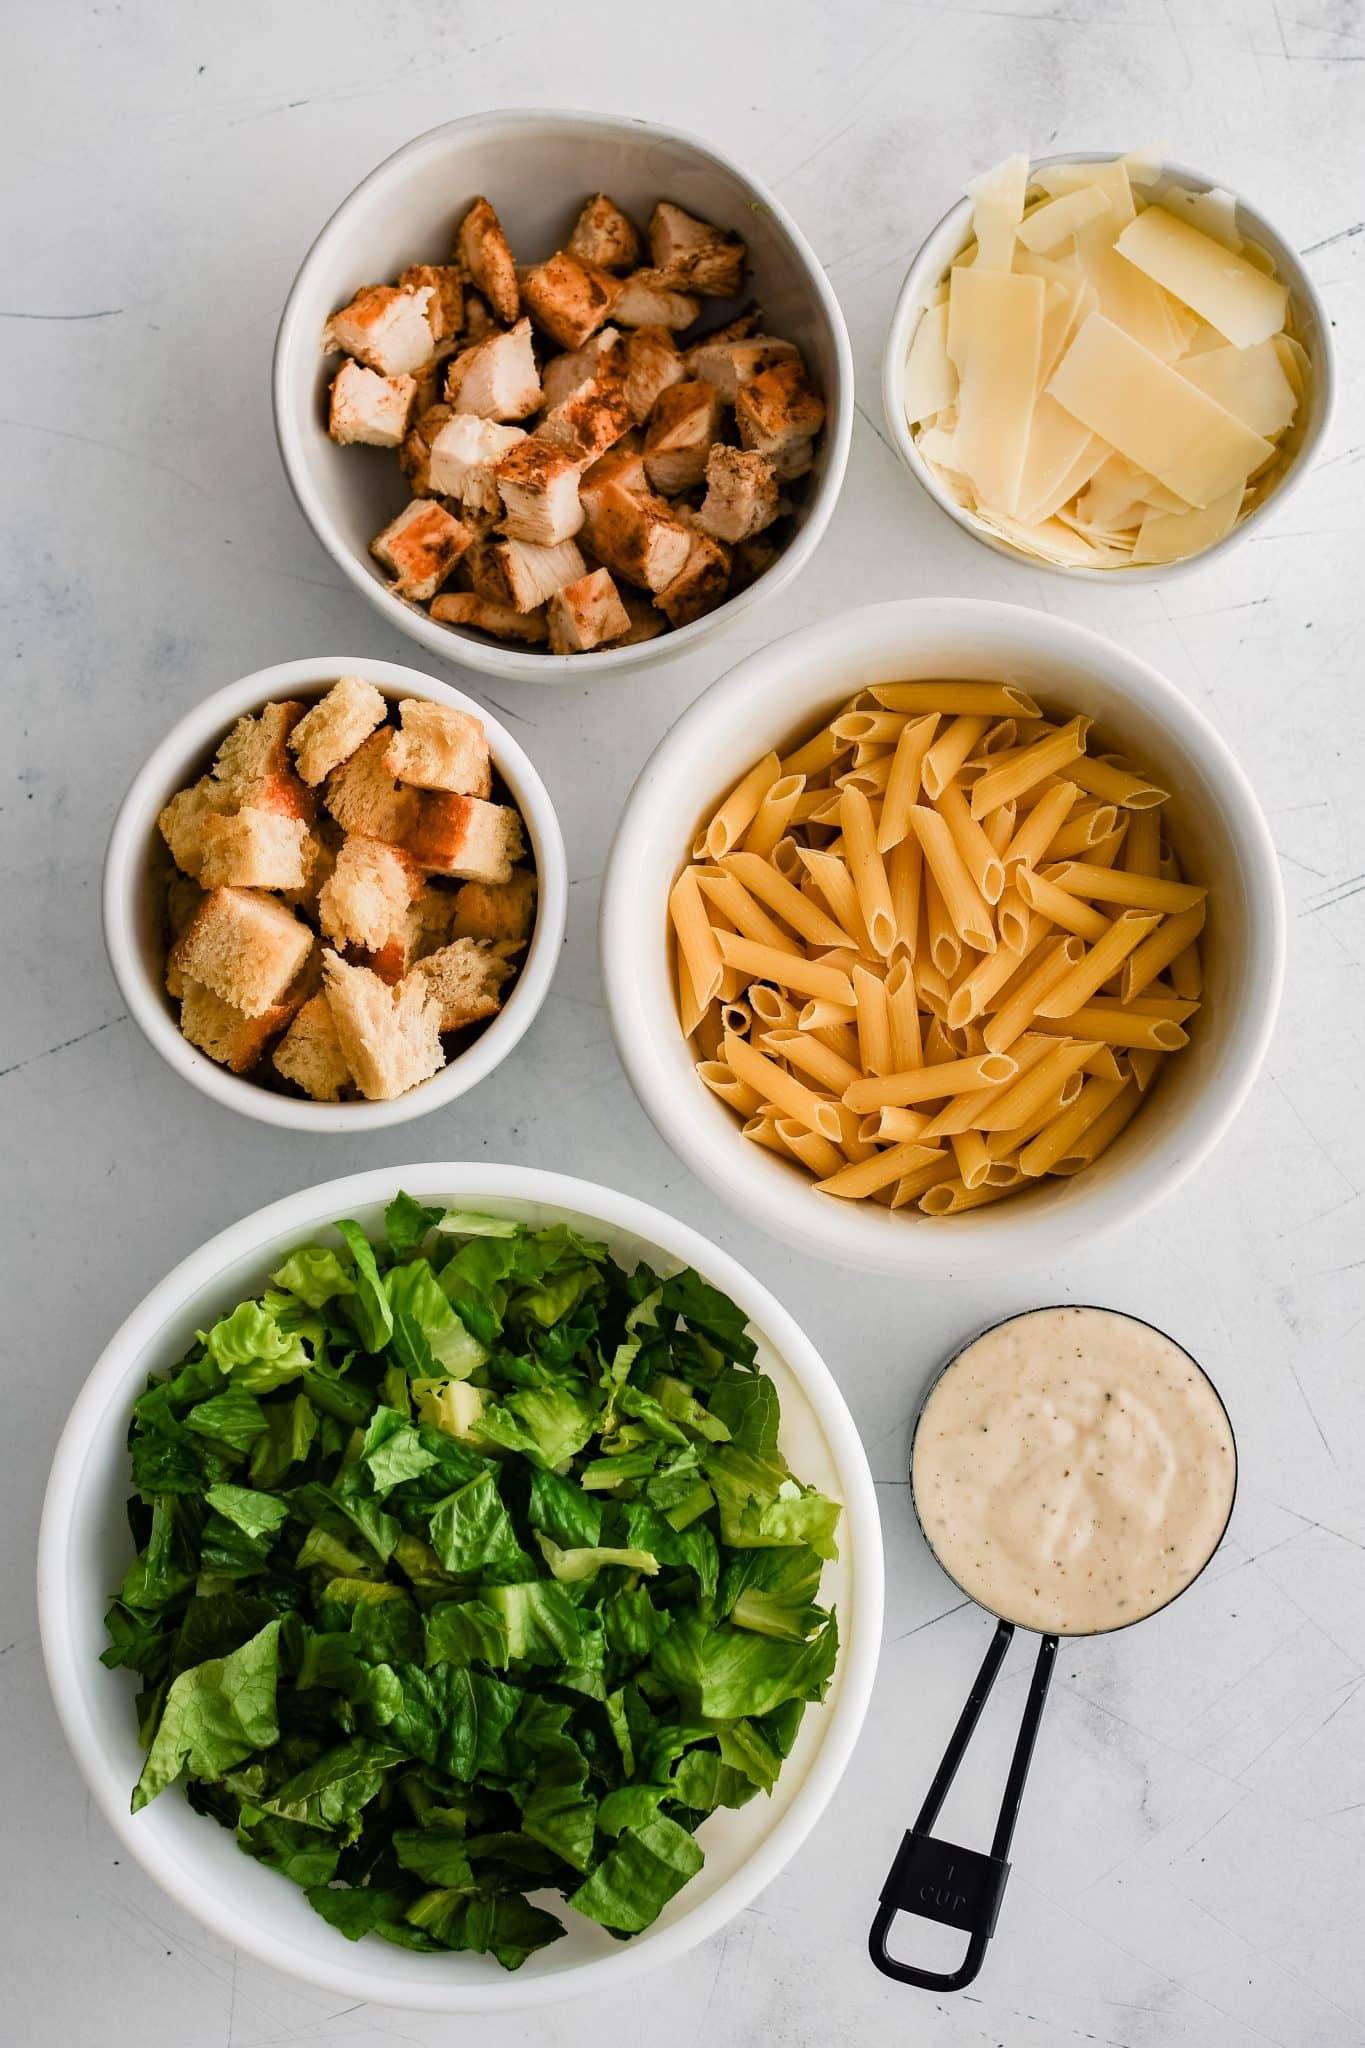 All of the ingredients for chicken Caesar pasta salad presented in individual measuring cups and ramekins.